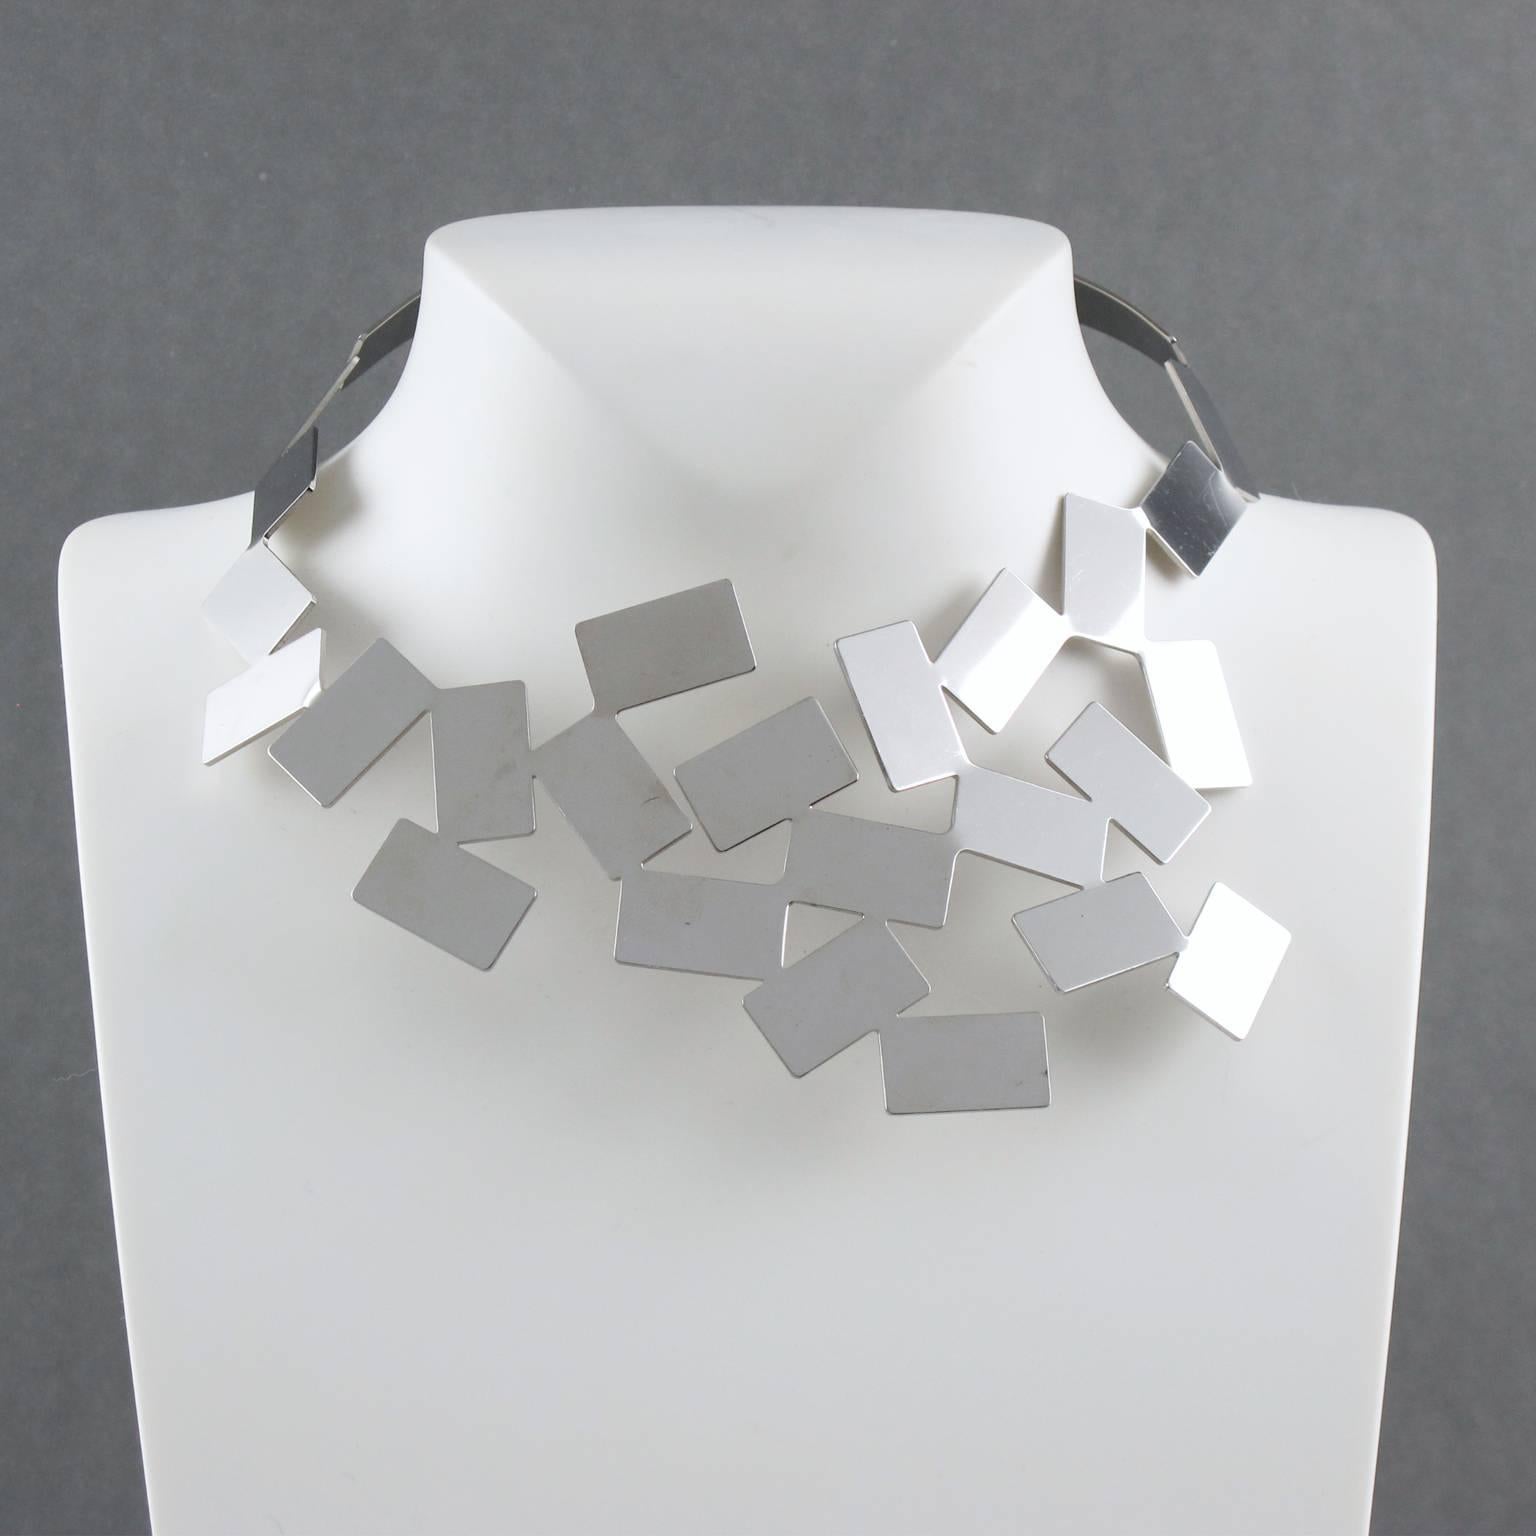 This stunning, modern collar necklace designed by Mario Trimarchi for Alessi is a real statement piece for any formal occasion. In vibrant stainless steel with polished mirrored surface, the cubic design looks sleek and stylish. Marked at the back: